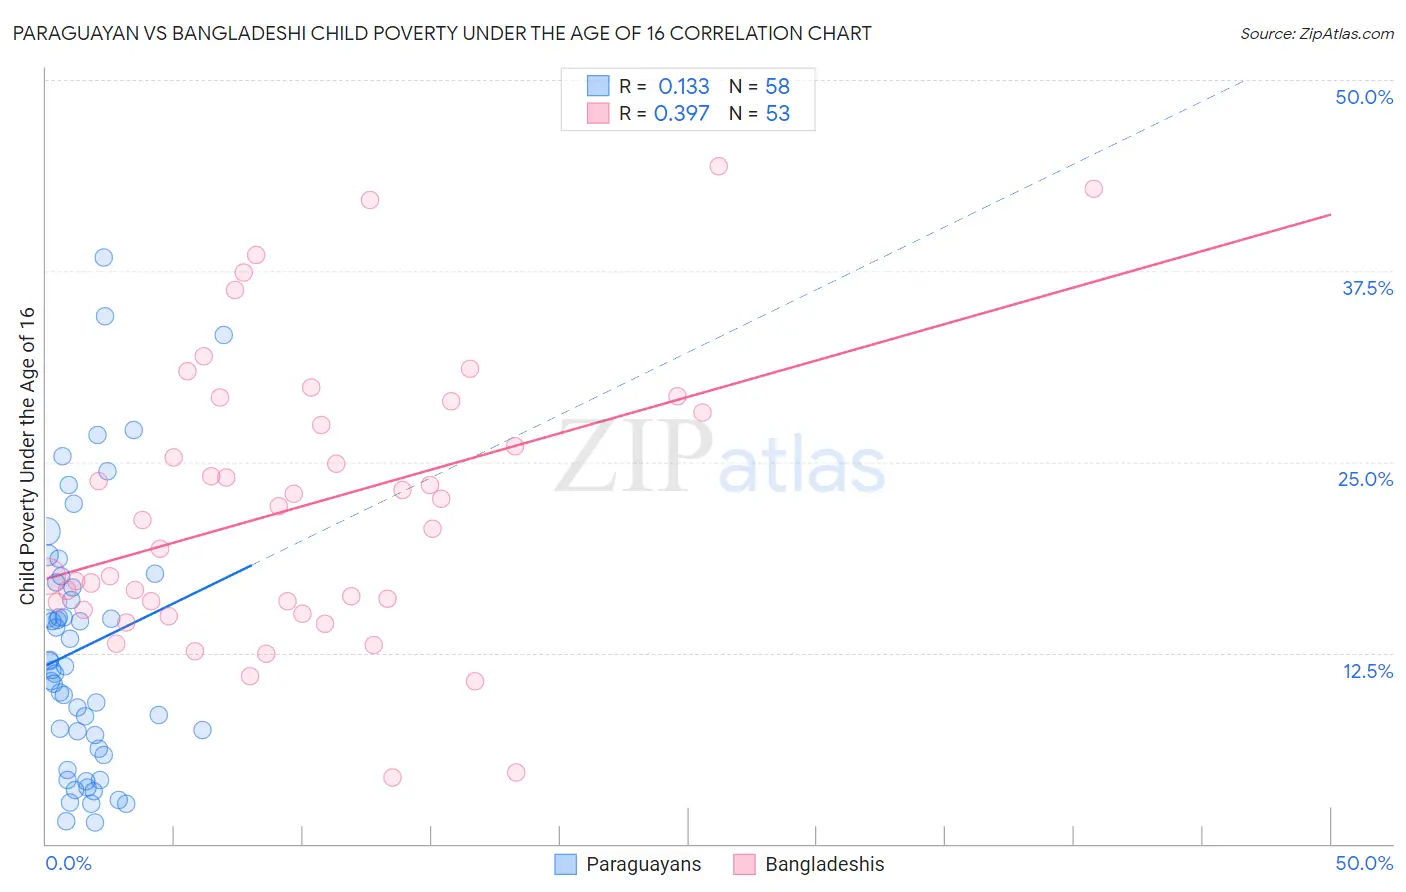 Paraguayan vs Bangladeshi Child Poverty Under the Age of 16